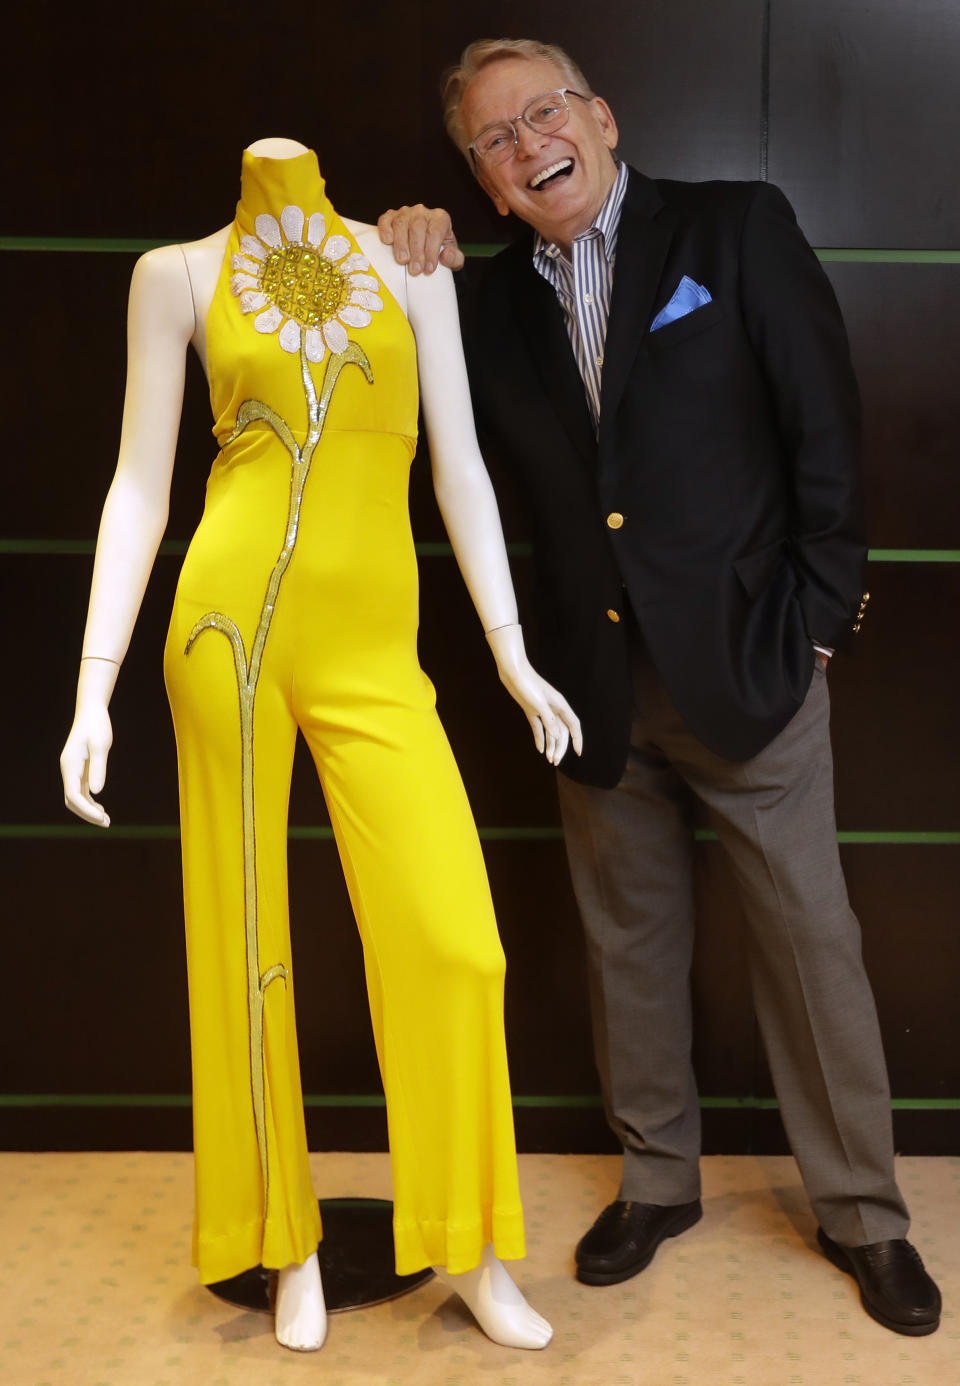 Fashion and Costume Designer Bob Mackie poses with one of his iconic designs, a marigold jersey jumpsuit worn by Cher between 1971-1976, in London, Thursday, Aug. 16, 2018. The jumpsuit which is embellished with a large white sunflower composed of sequins, and beads, is estimated at 3,000-5,000 US Dollars (2,363-3,938 UK Pounds) and will be auctioned in the 'Property from the Collection of Bob Mackie' sale by Julien's Auctions in Los Angeles on Nov. 17. (AP Photo/Kirsty Wigglesworth)